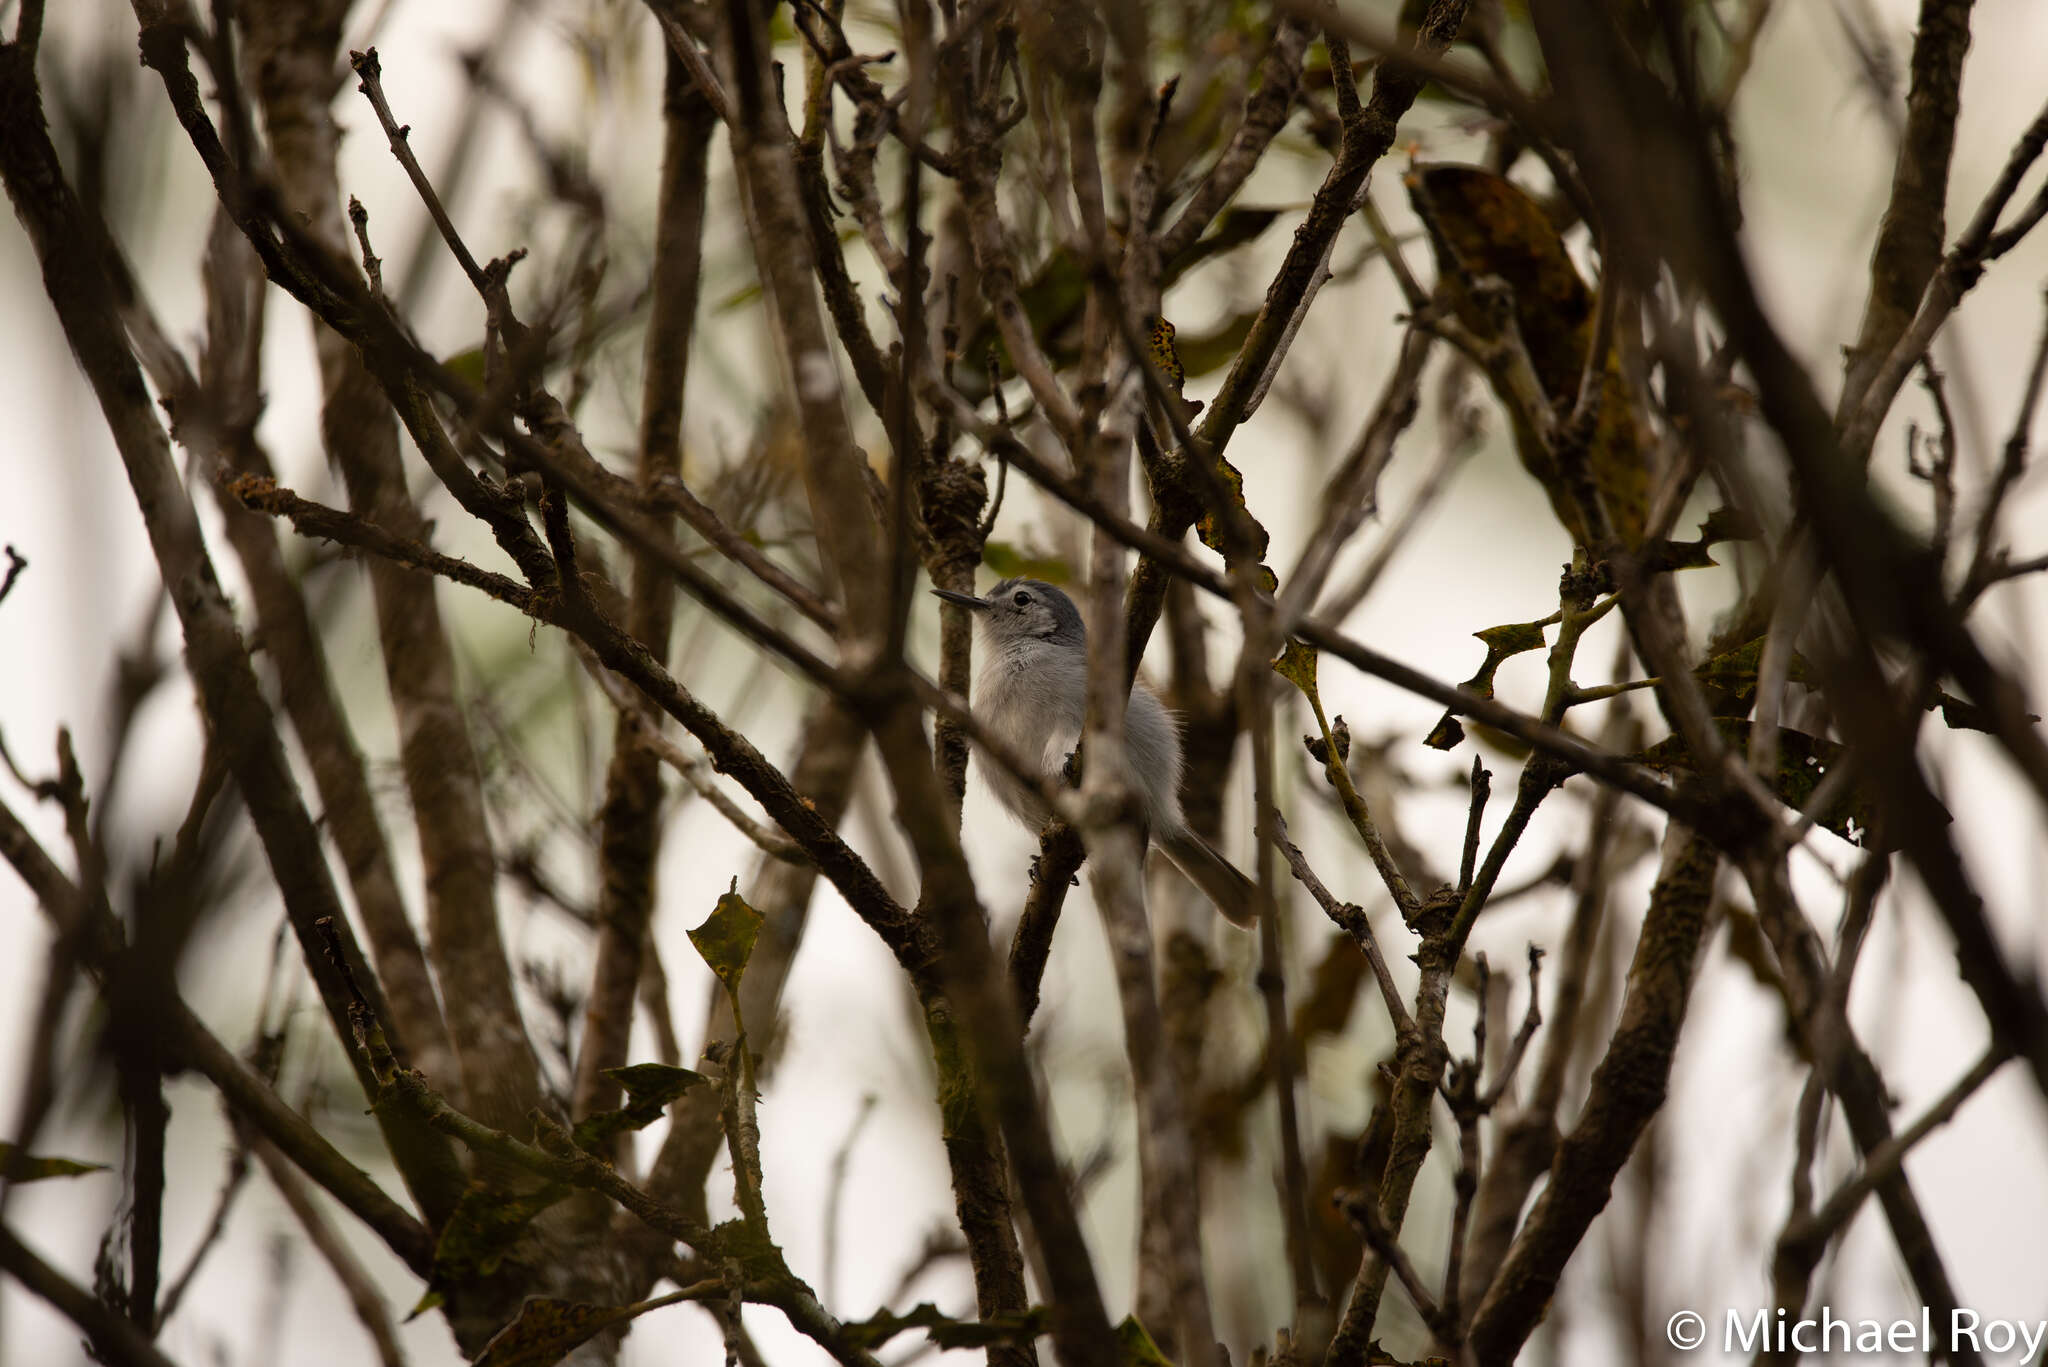 Image of White-browed Gnatcatcher